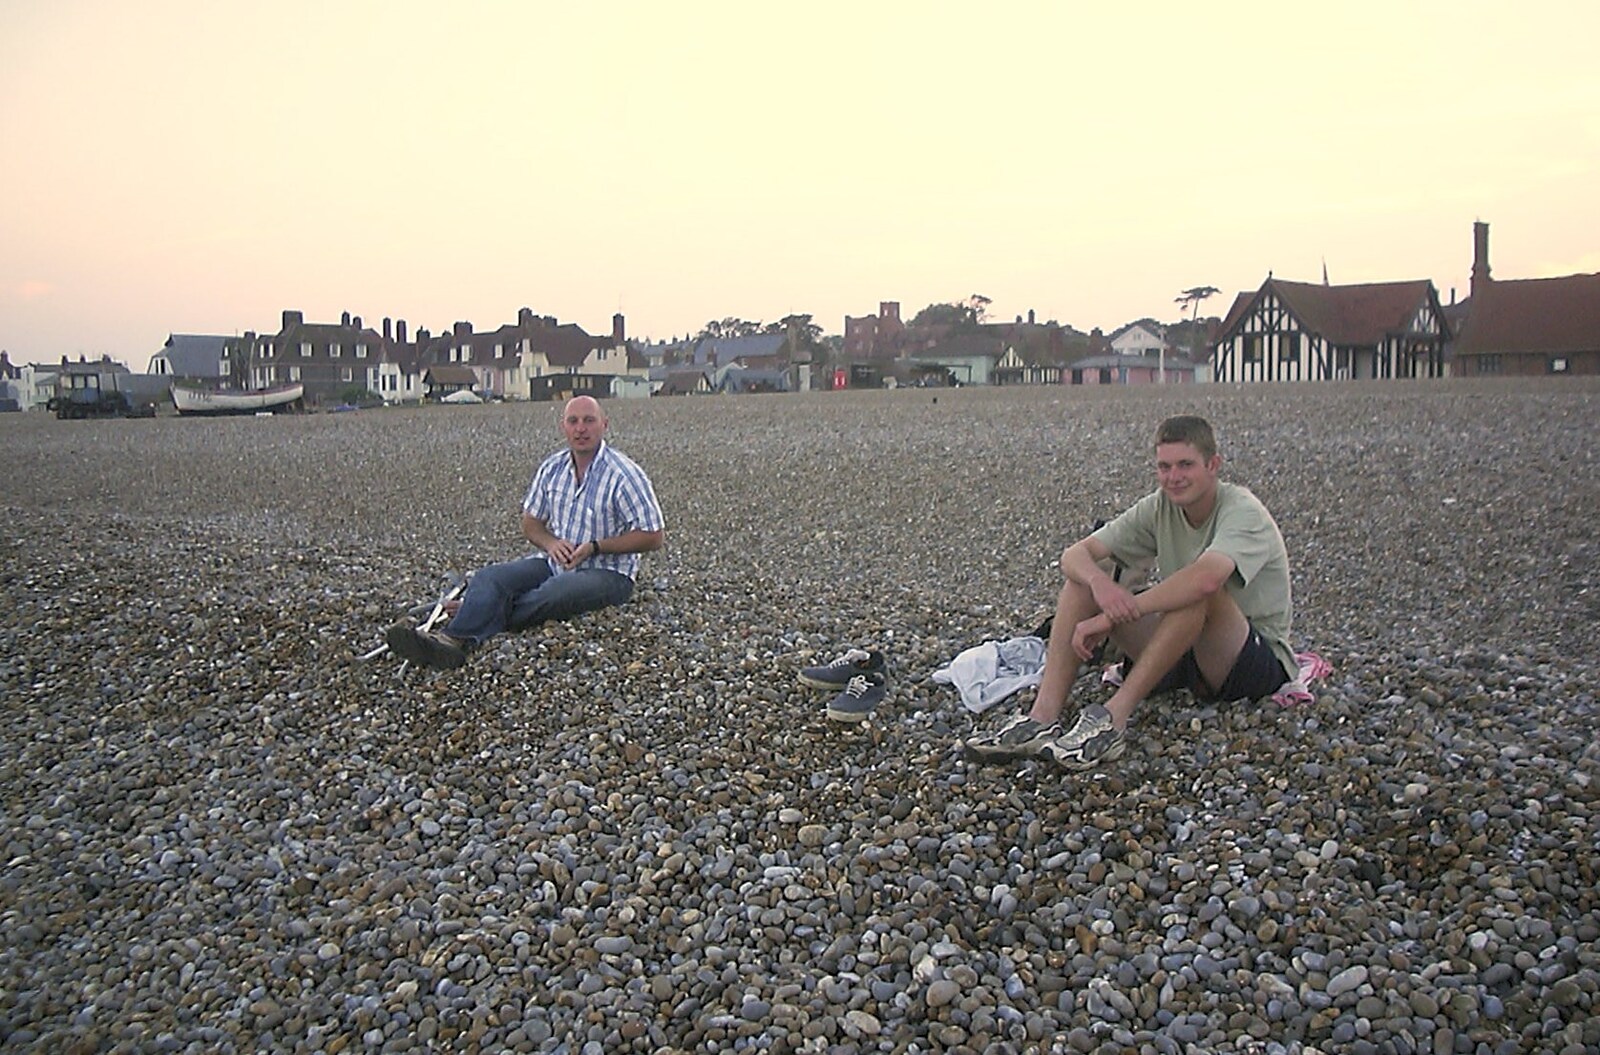 Gov and The Boy Phil on the beach from Fish and Chips on the Beach, Aldeburgh, Suffolk - 12th September 2003